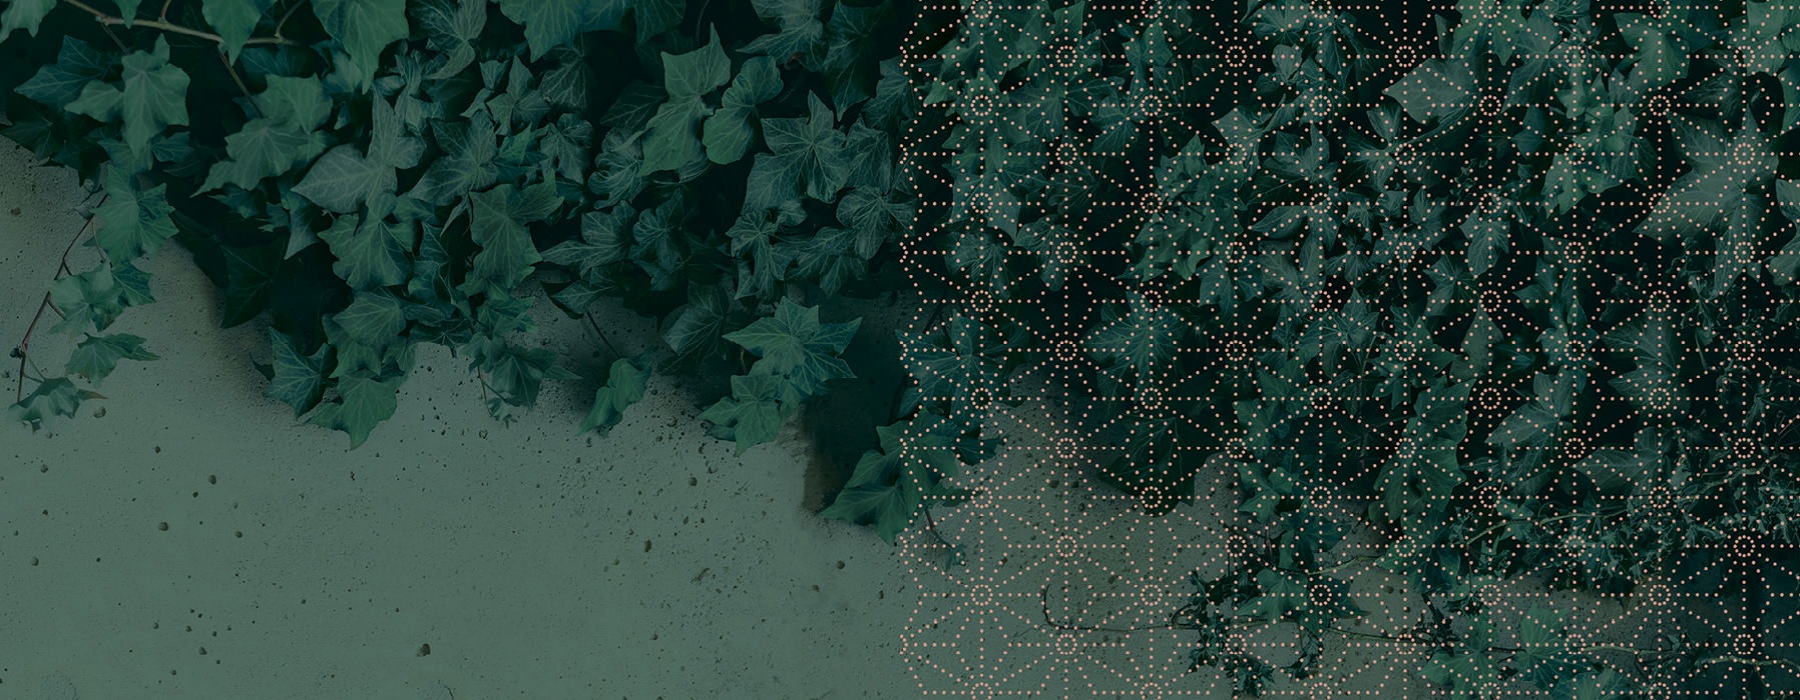 image of ivy over green background and a pattern overlay